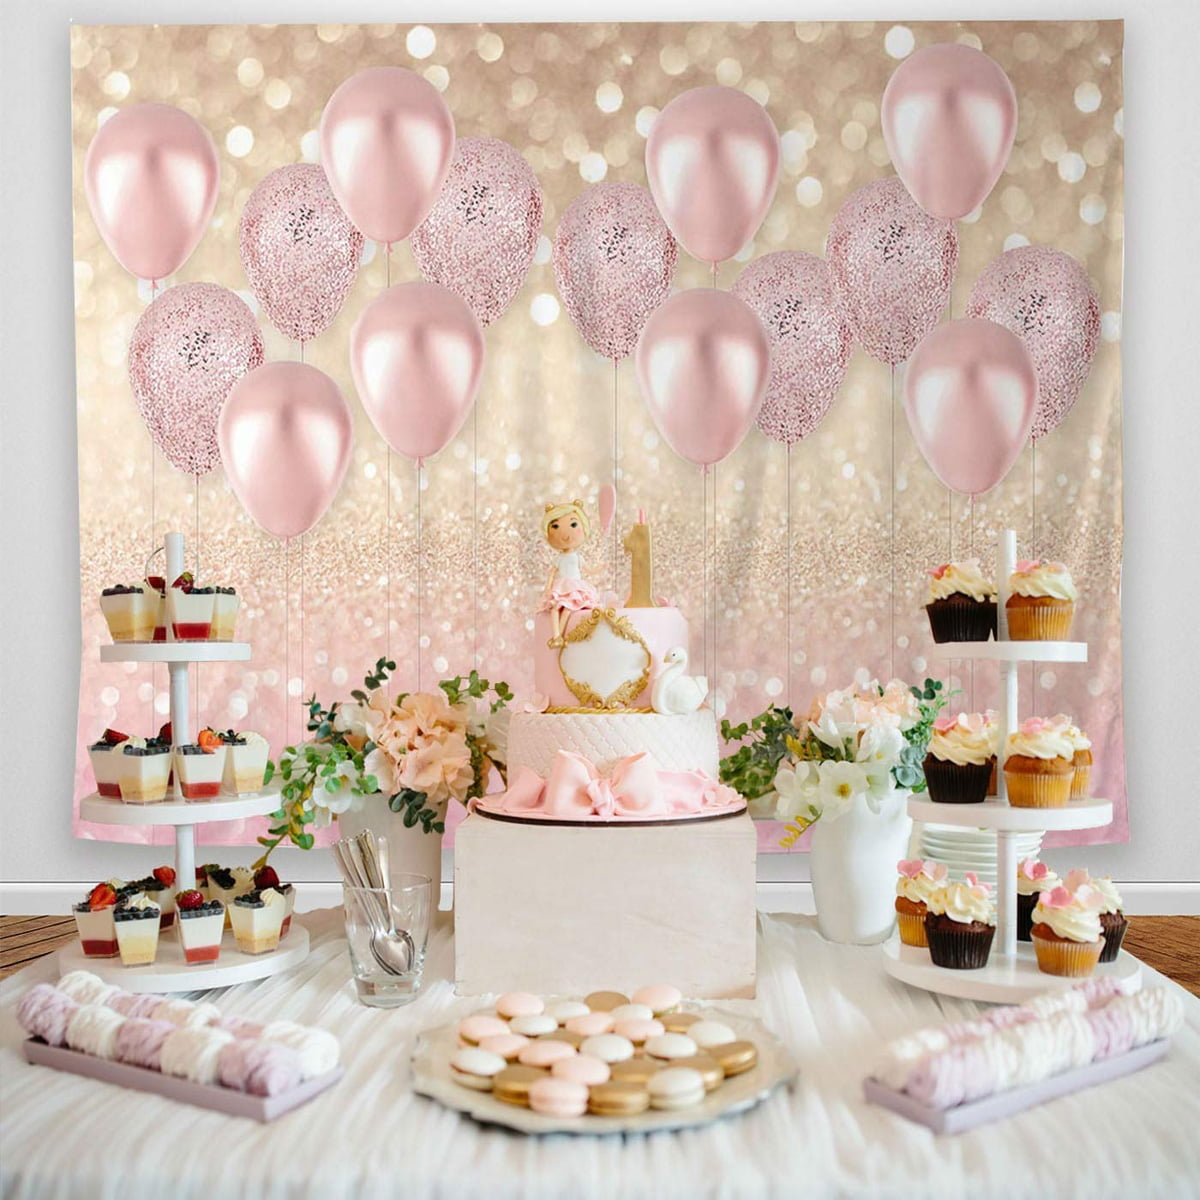 Haoyiyi 7x5ft Party Photography Backdrop Pink Balloon Supplies Rose Gold Decorations Glitter Bokeh Halos Background for Kids Adult Girl Woman Birthday Bridal Shower Portrait Photo Studio Props 